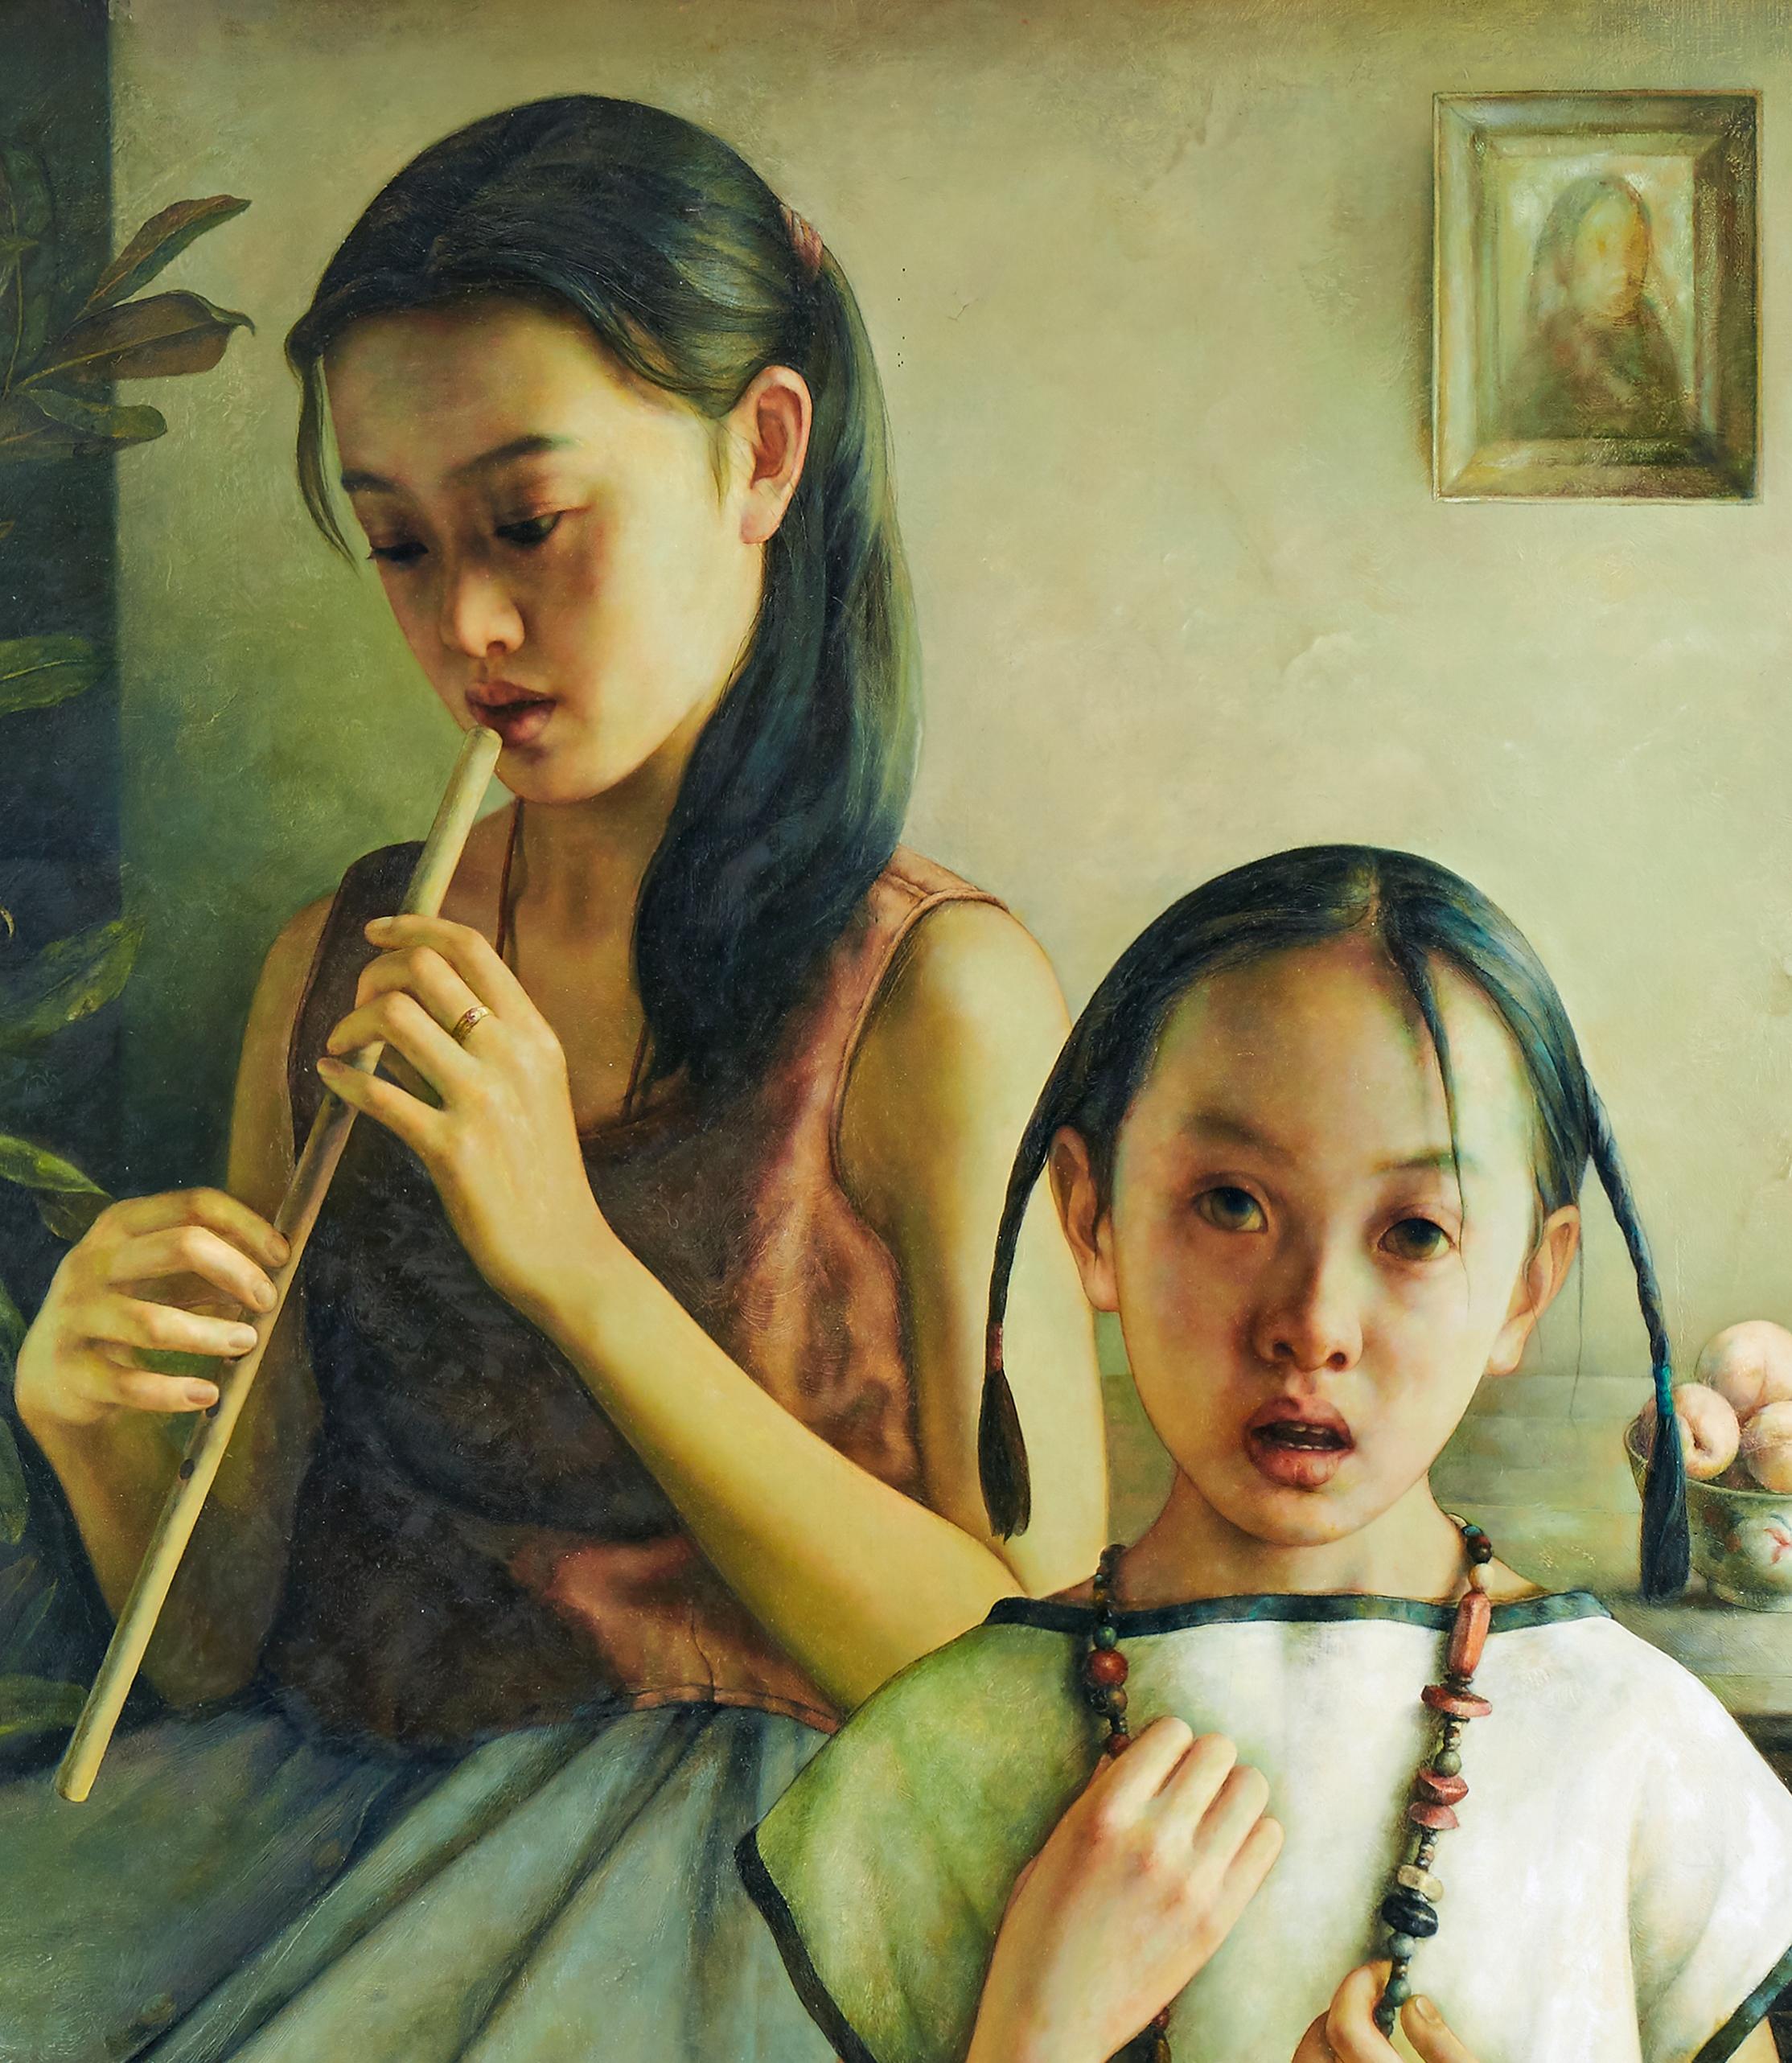 Zhao Kailin (China born 1961)
Interior with two girls. 
Signed and dated Zhao Kailin 1994.1 lower left. 
Oil on canvas, 
Image: 54.75